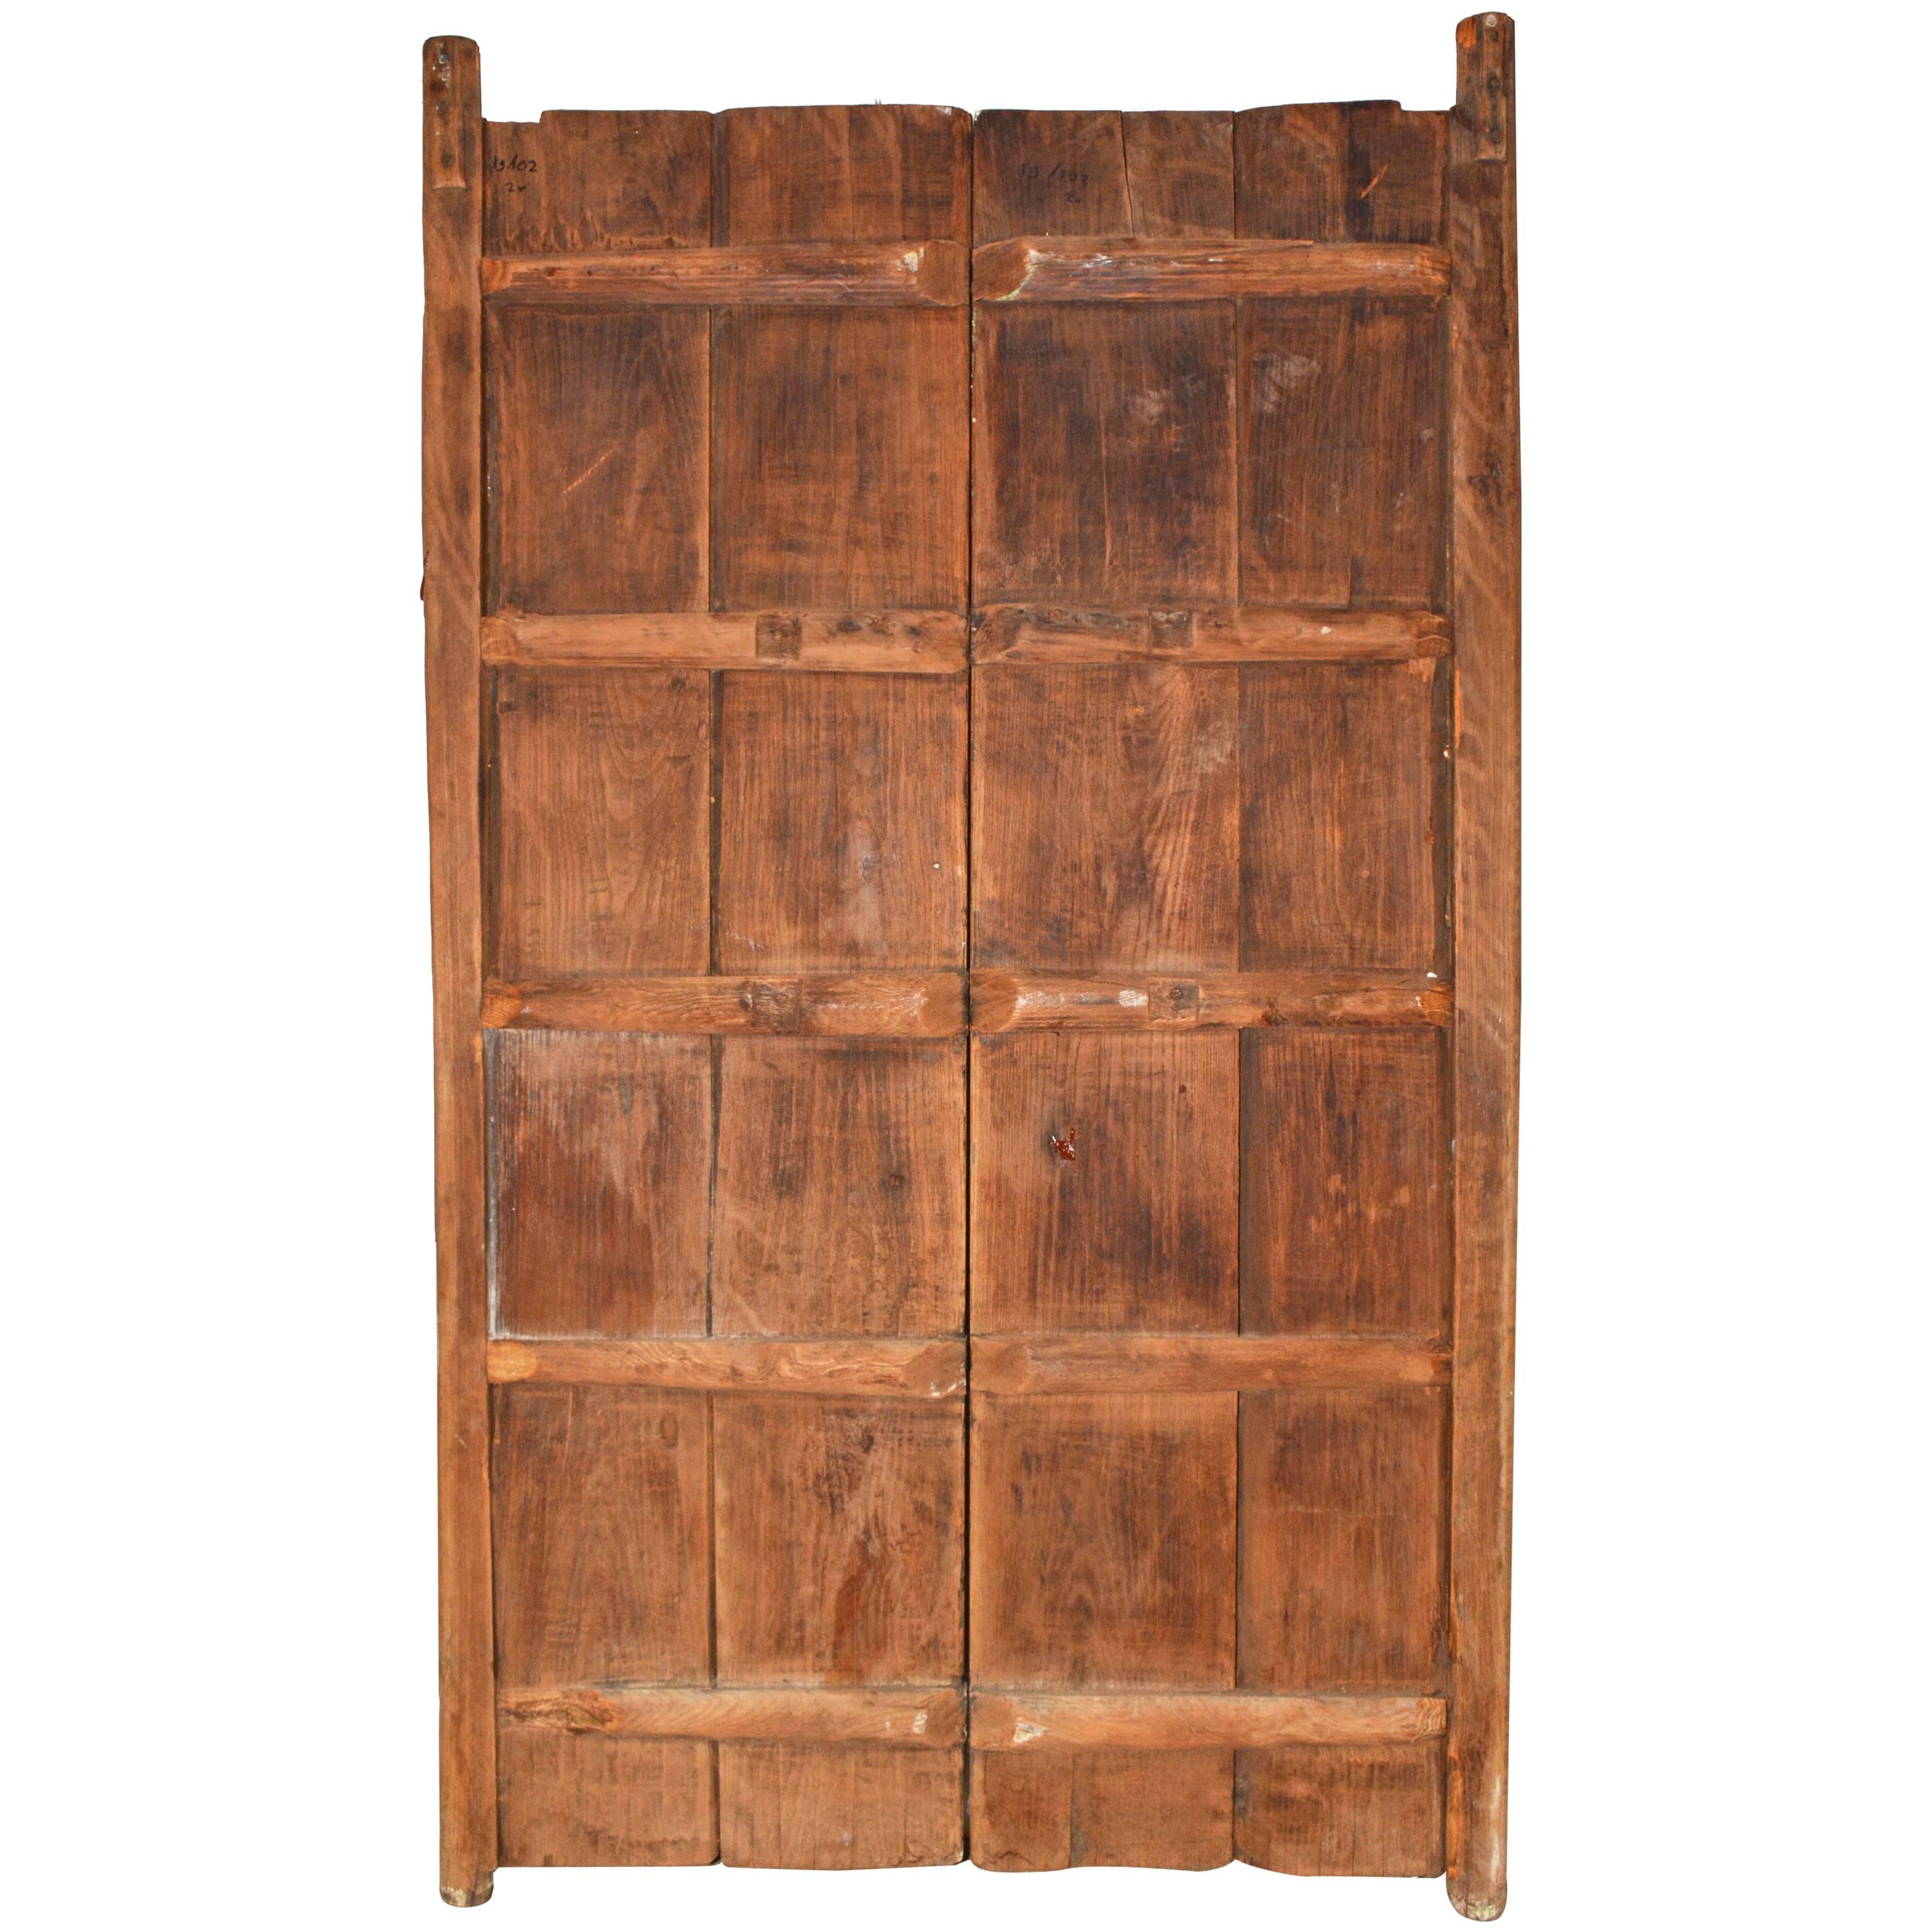 The pair of Medieval-style wood doors are held together with horizontal wood strips on the backs. Pegs at the tops and bottoms are made for swinging the doors open and closed.

Pegs at top: 2.50